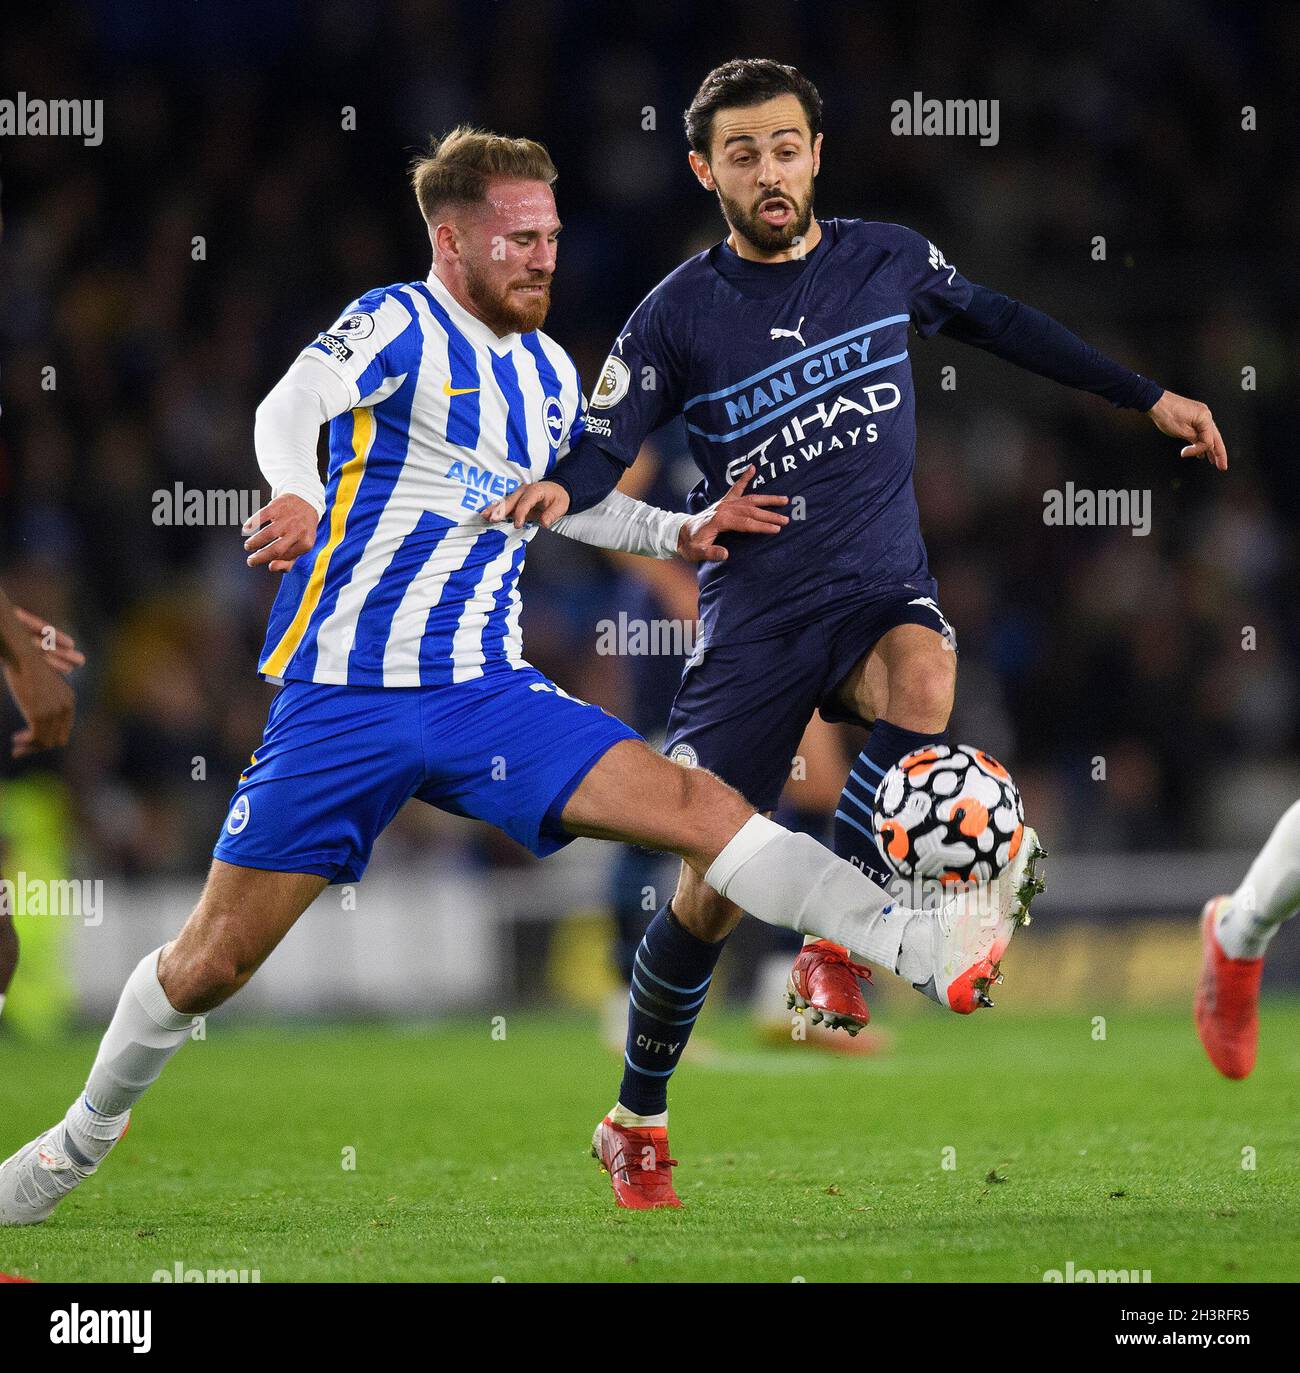 Manchester City's Bernardo Silva during the match at the Amex Stadium. Picture : Mark Pain / Alamy Stock Photo